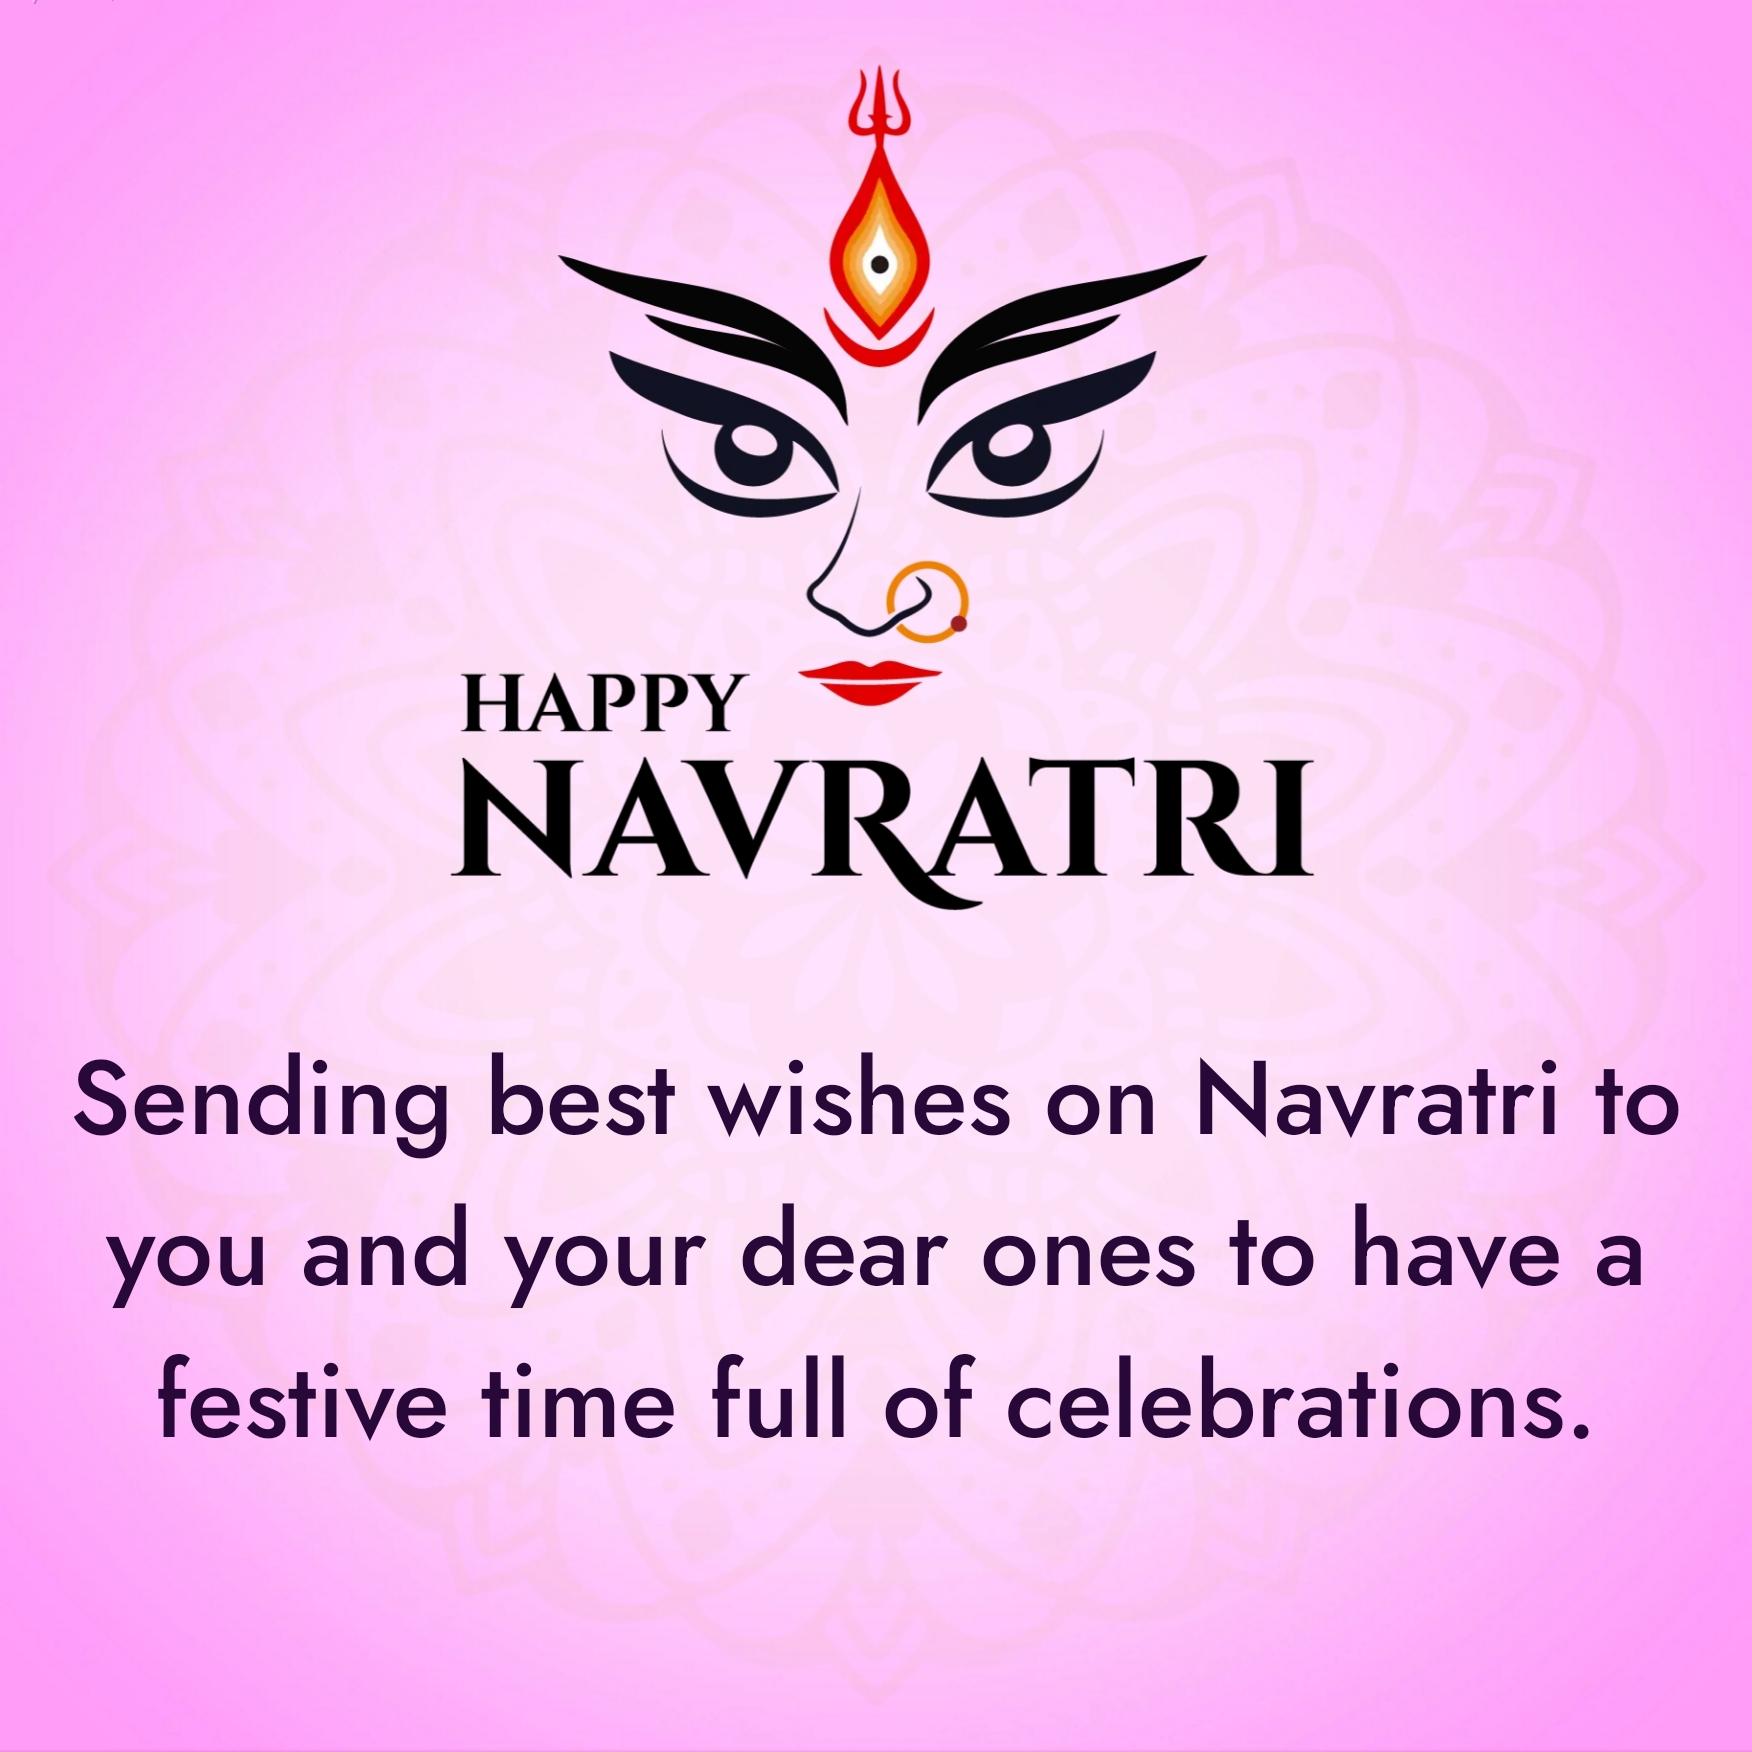 Sending best wishes on Navratri to you